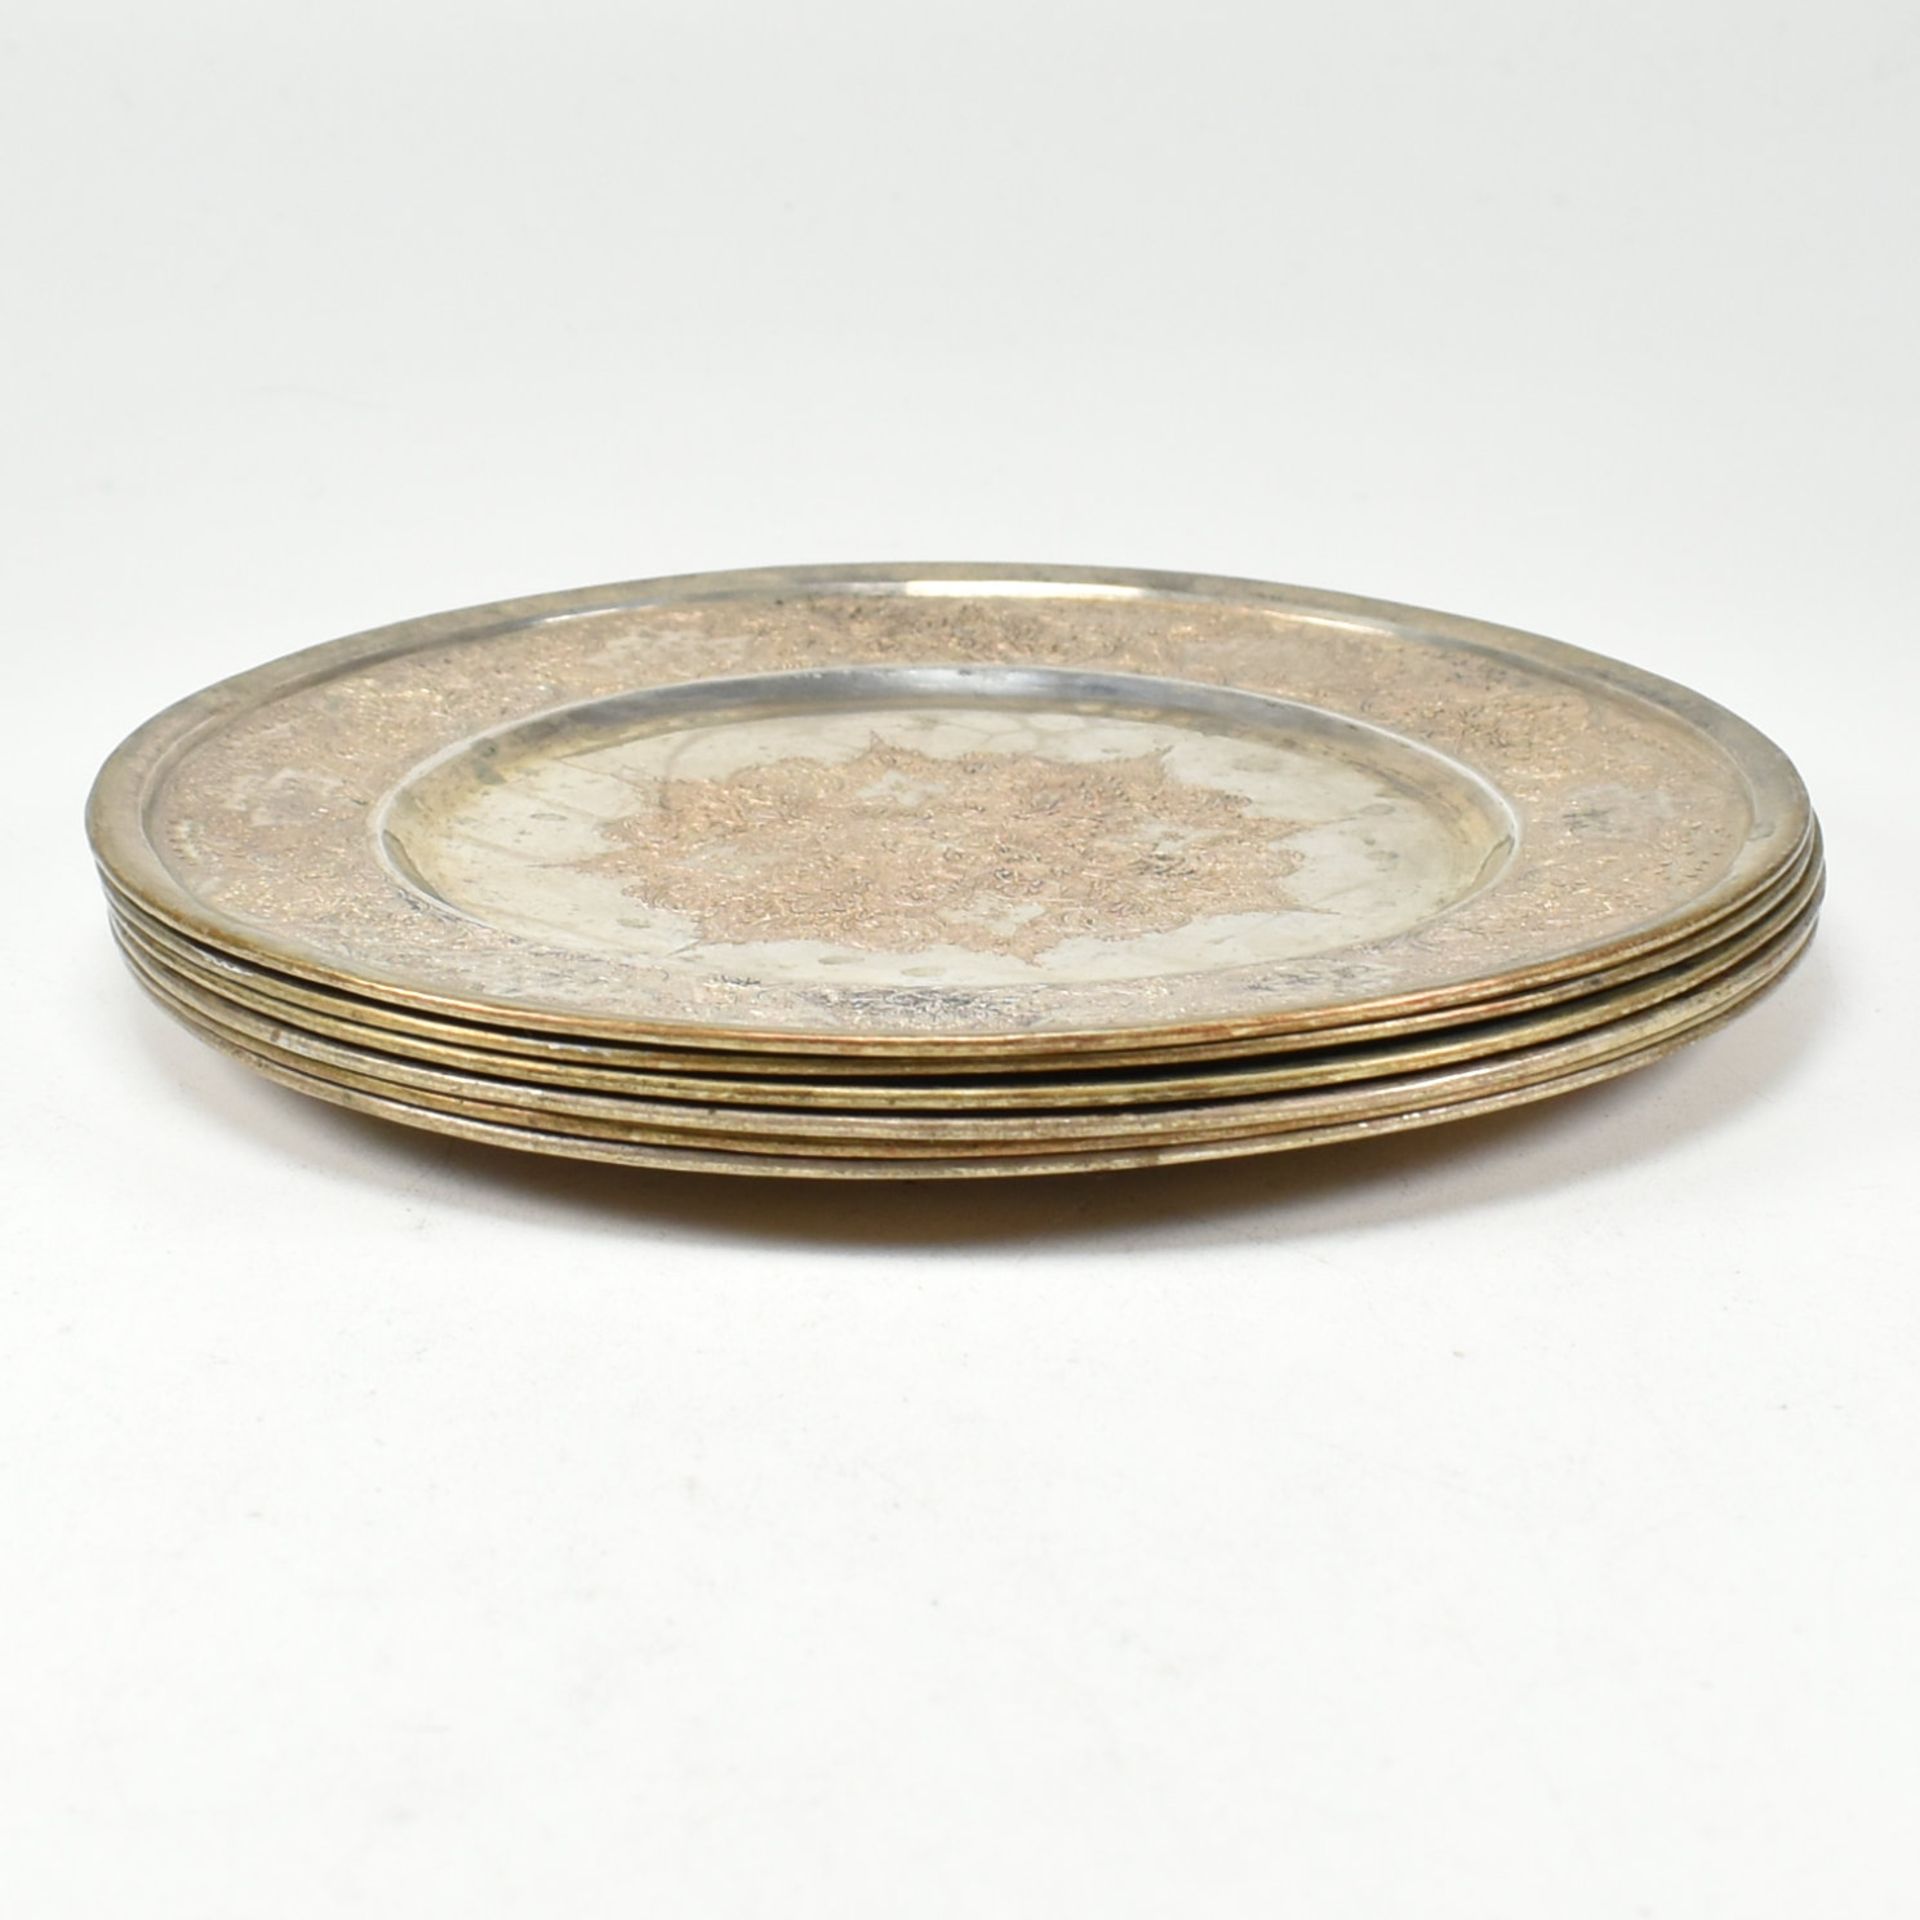 SET OF SIX PERSIAN SILVER SIDE PLATES - Image 10 of 15